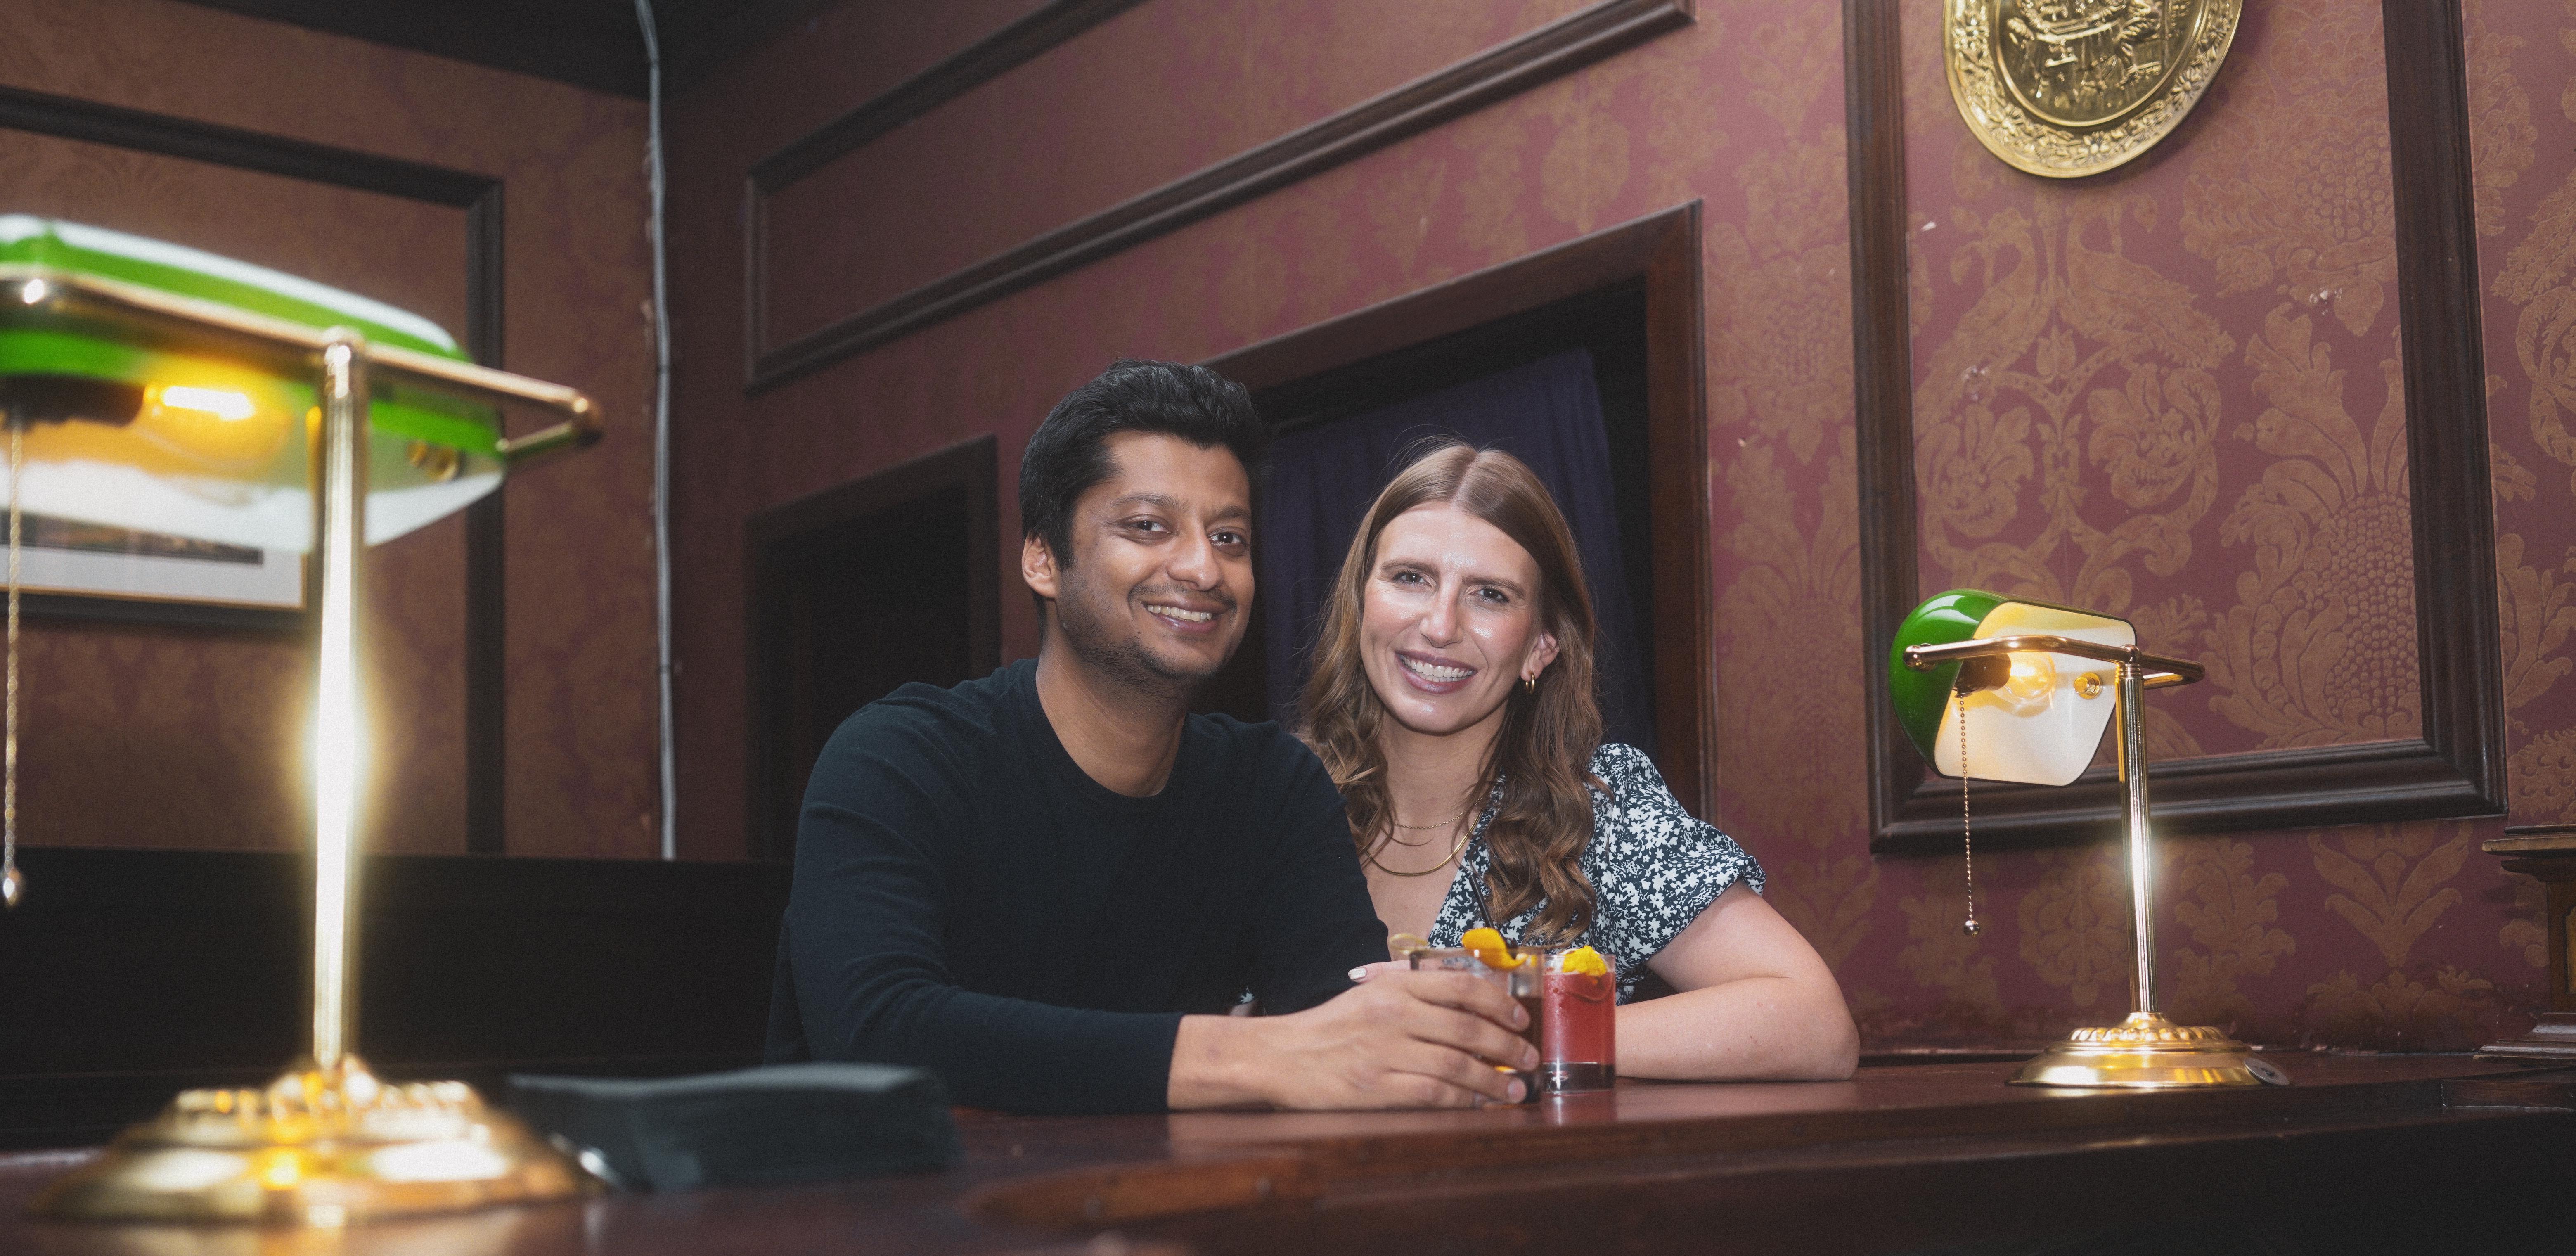 The Wedding Website of Kendall McManus and Ankur Agrawal